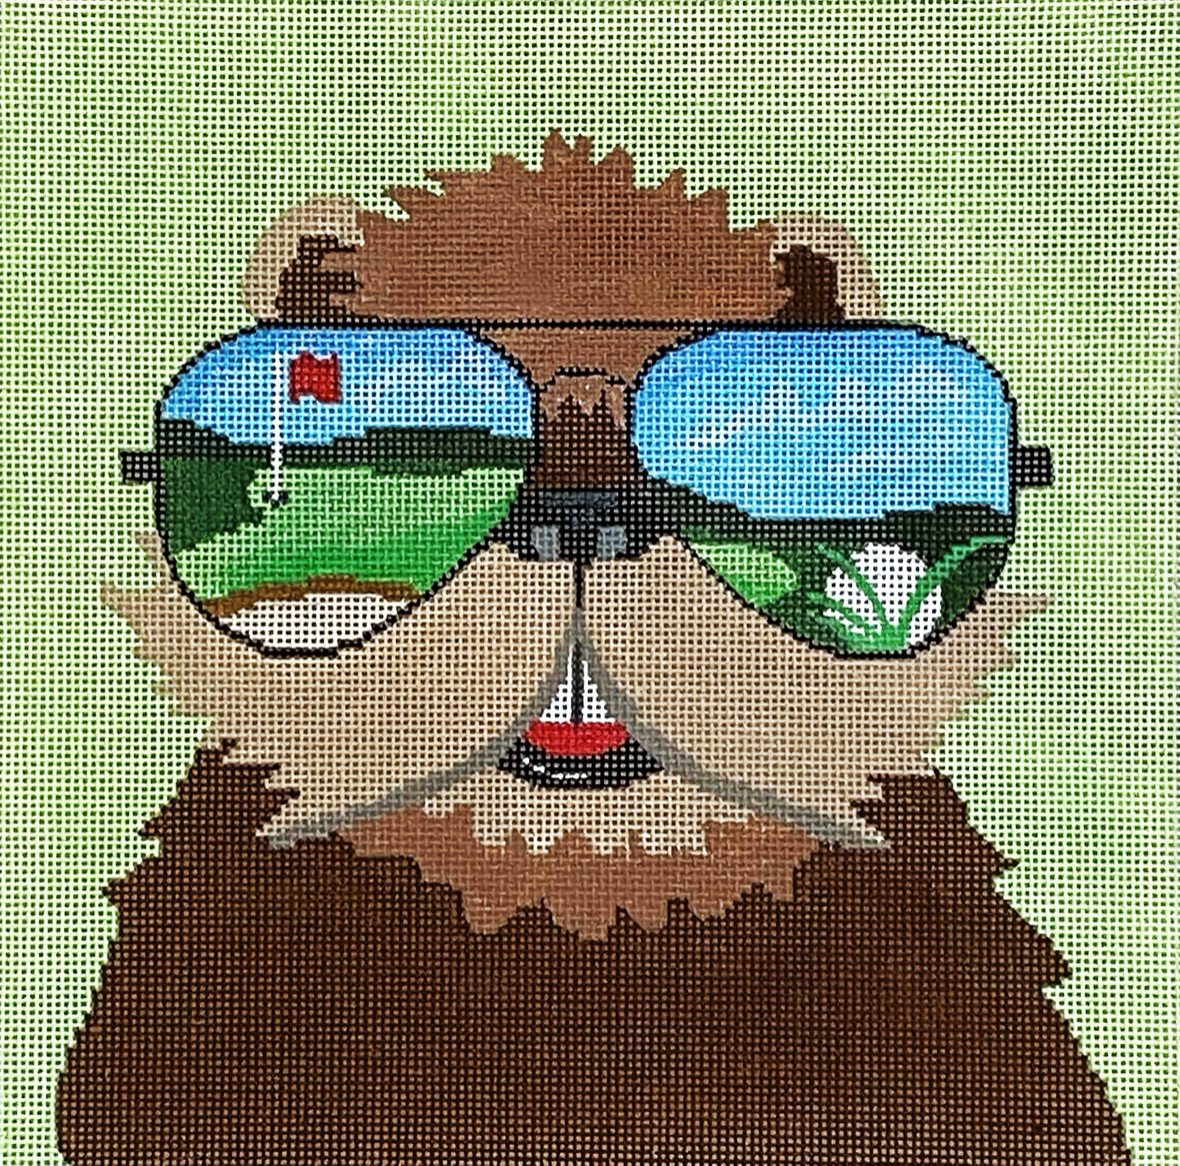 Gopher with Sunglasses